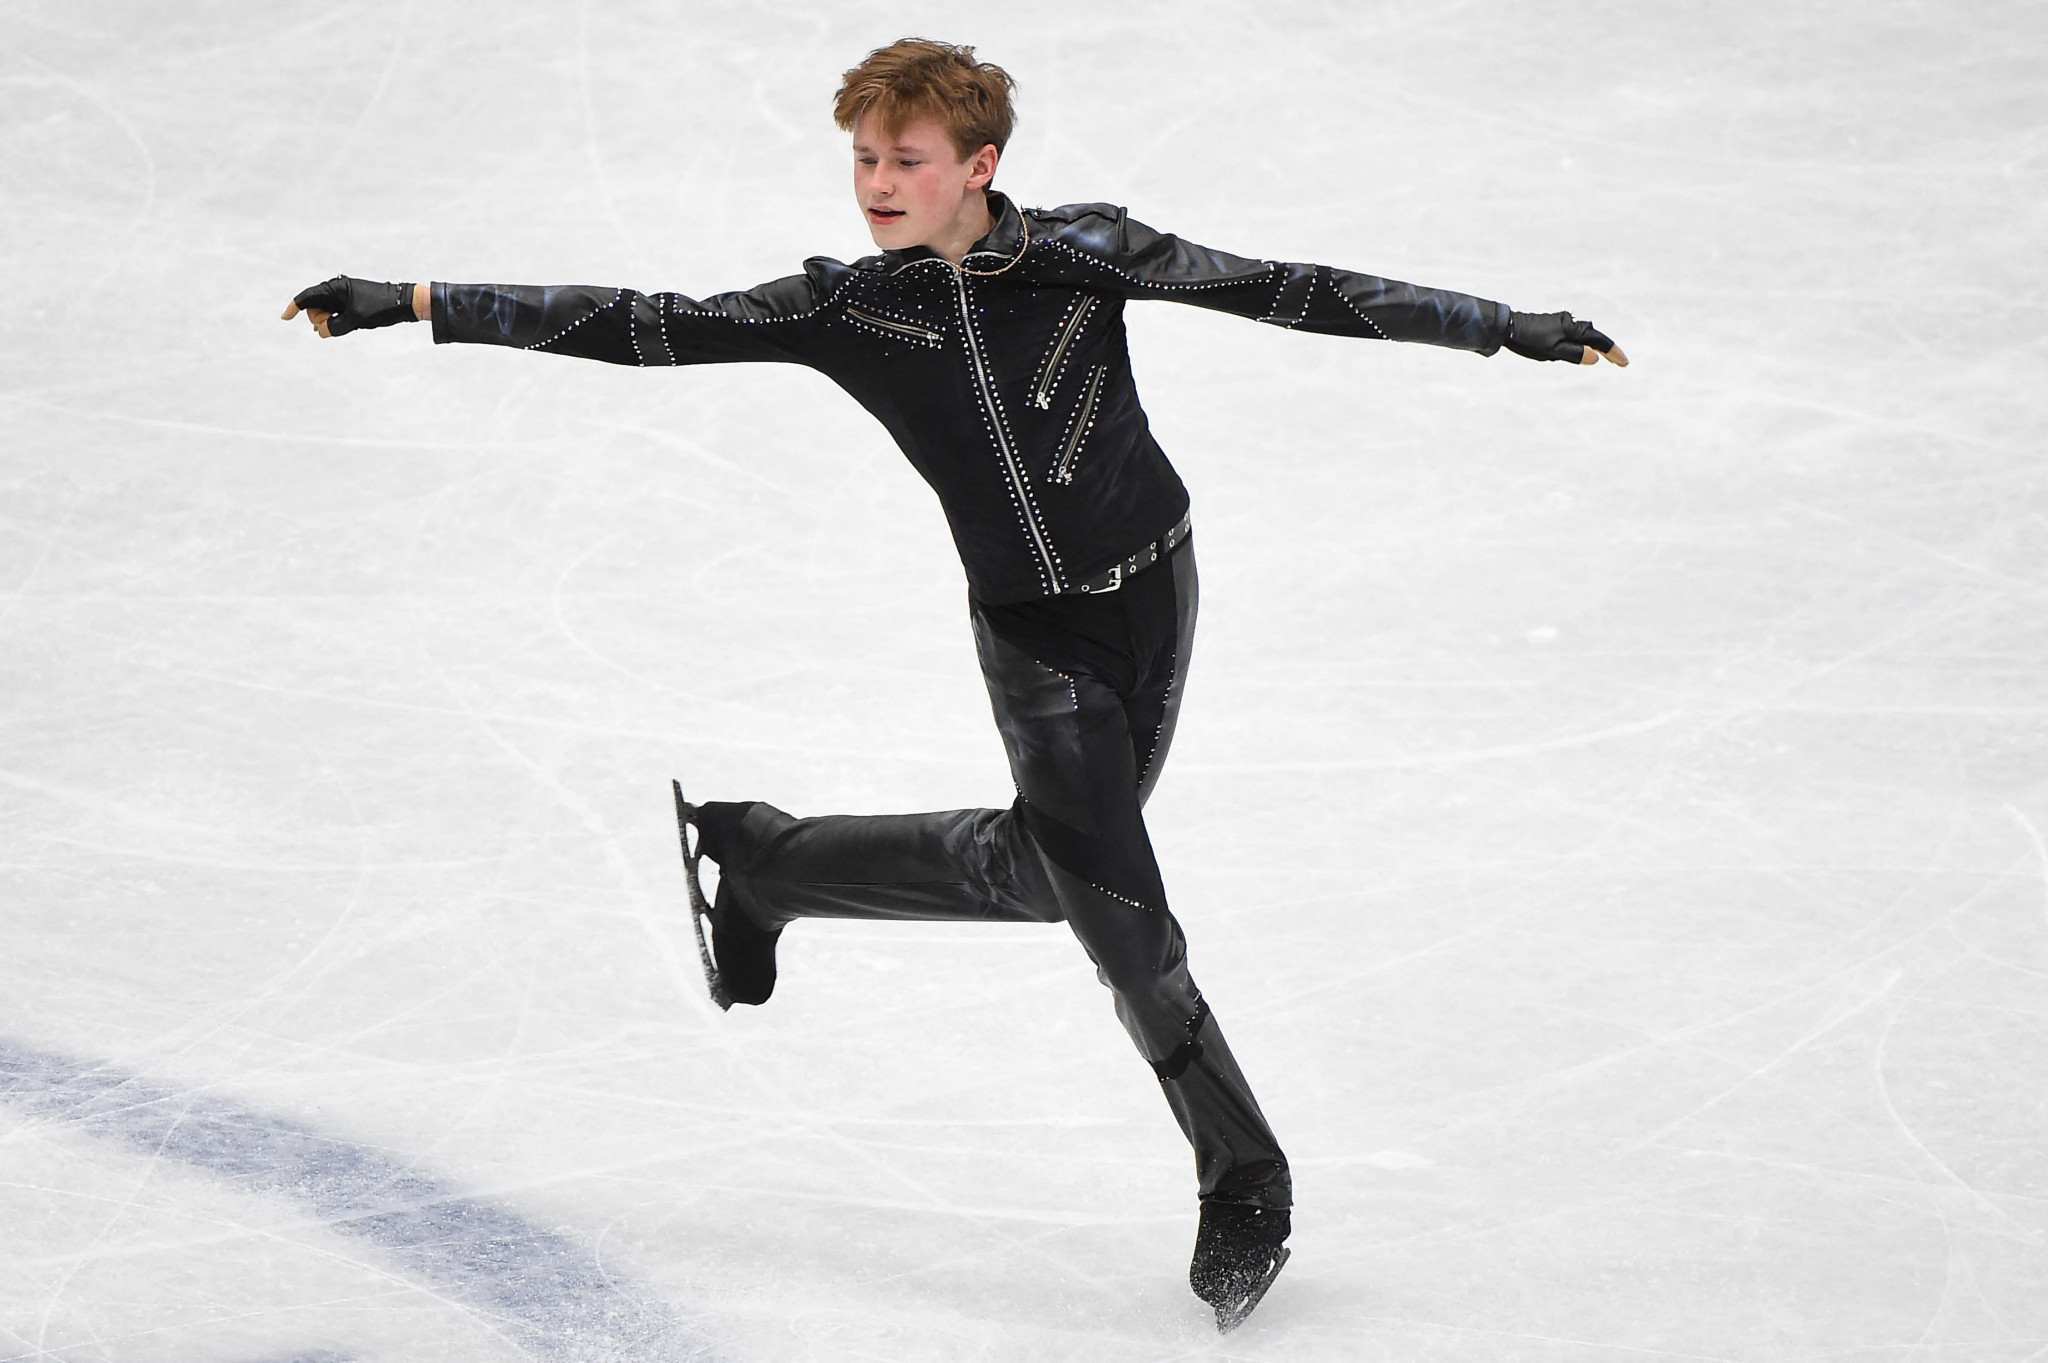 American figure skater Ilia Malinin successfully landed a quadruple Axel at the US International Classic in Lake Placid ©Getty Images